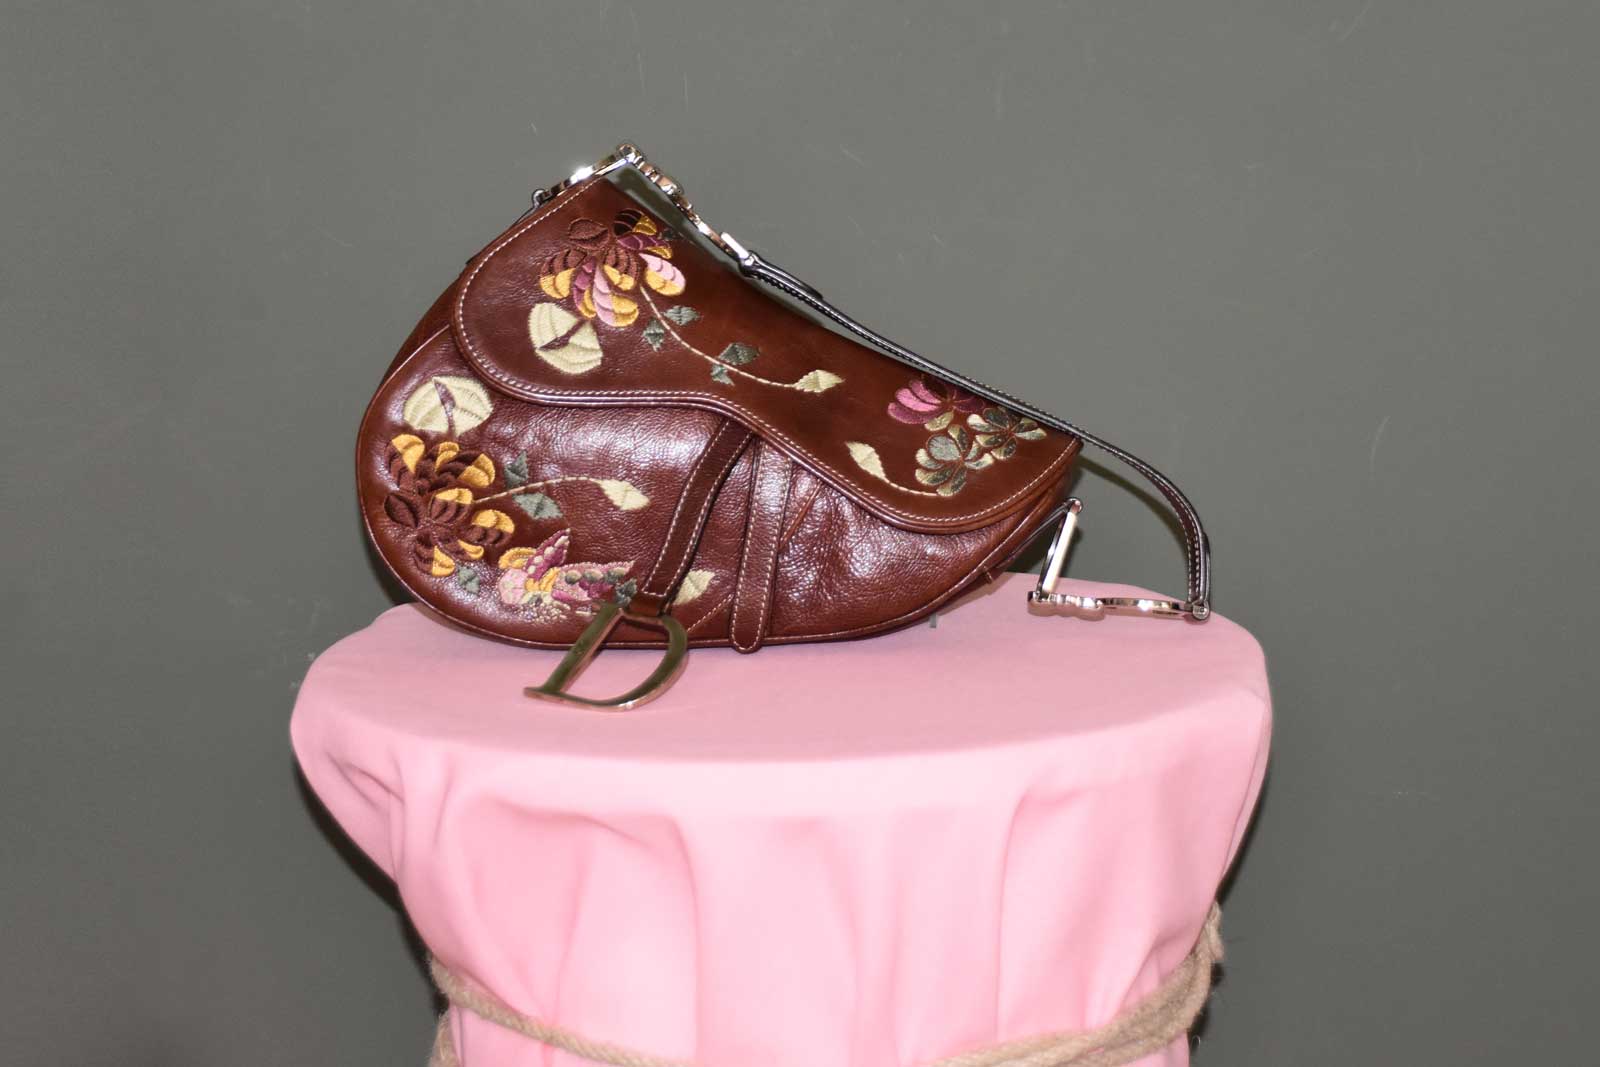 CHRISTIAN DIOR SADDLE BAG WITH FLOWER EMBROIDERED